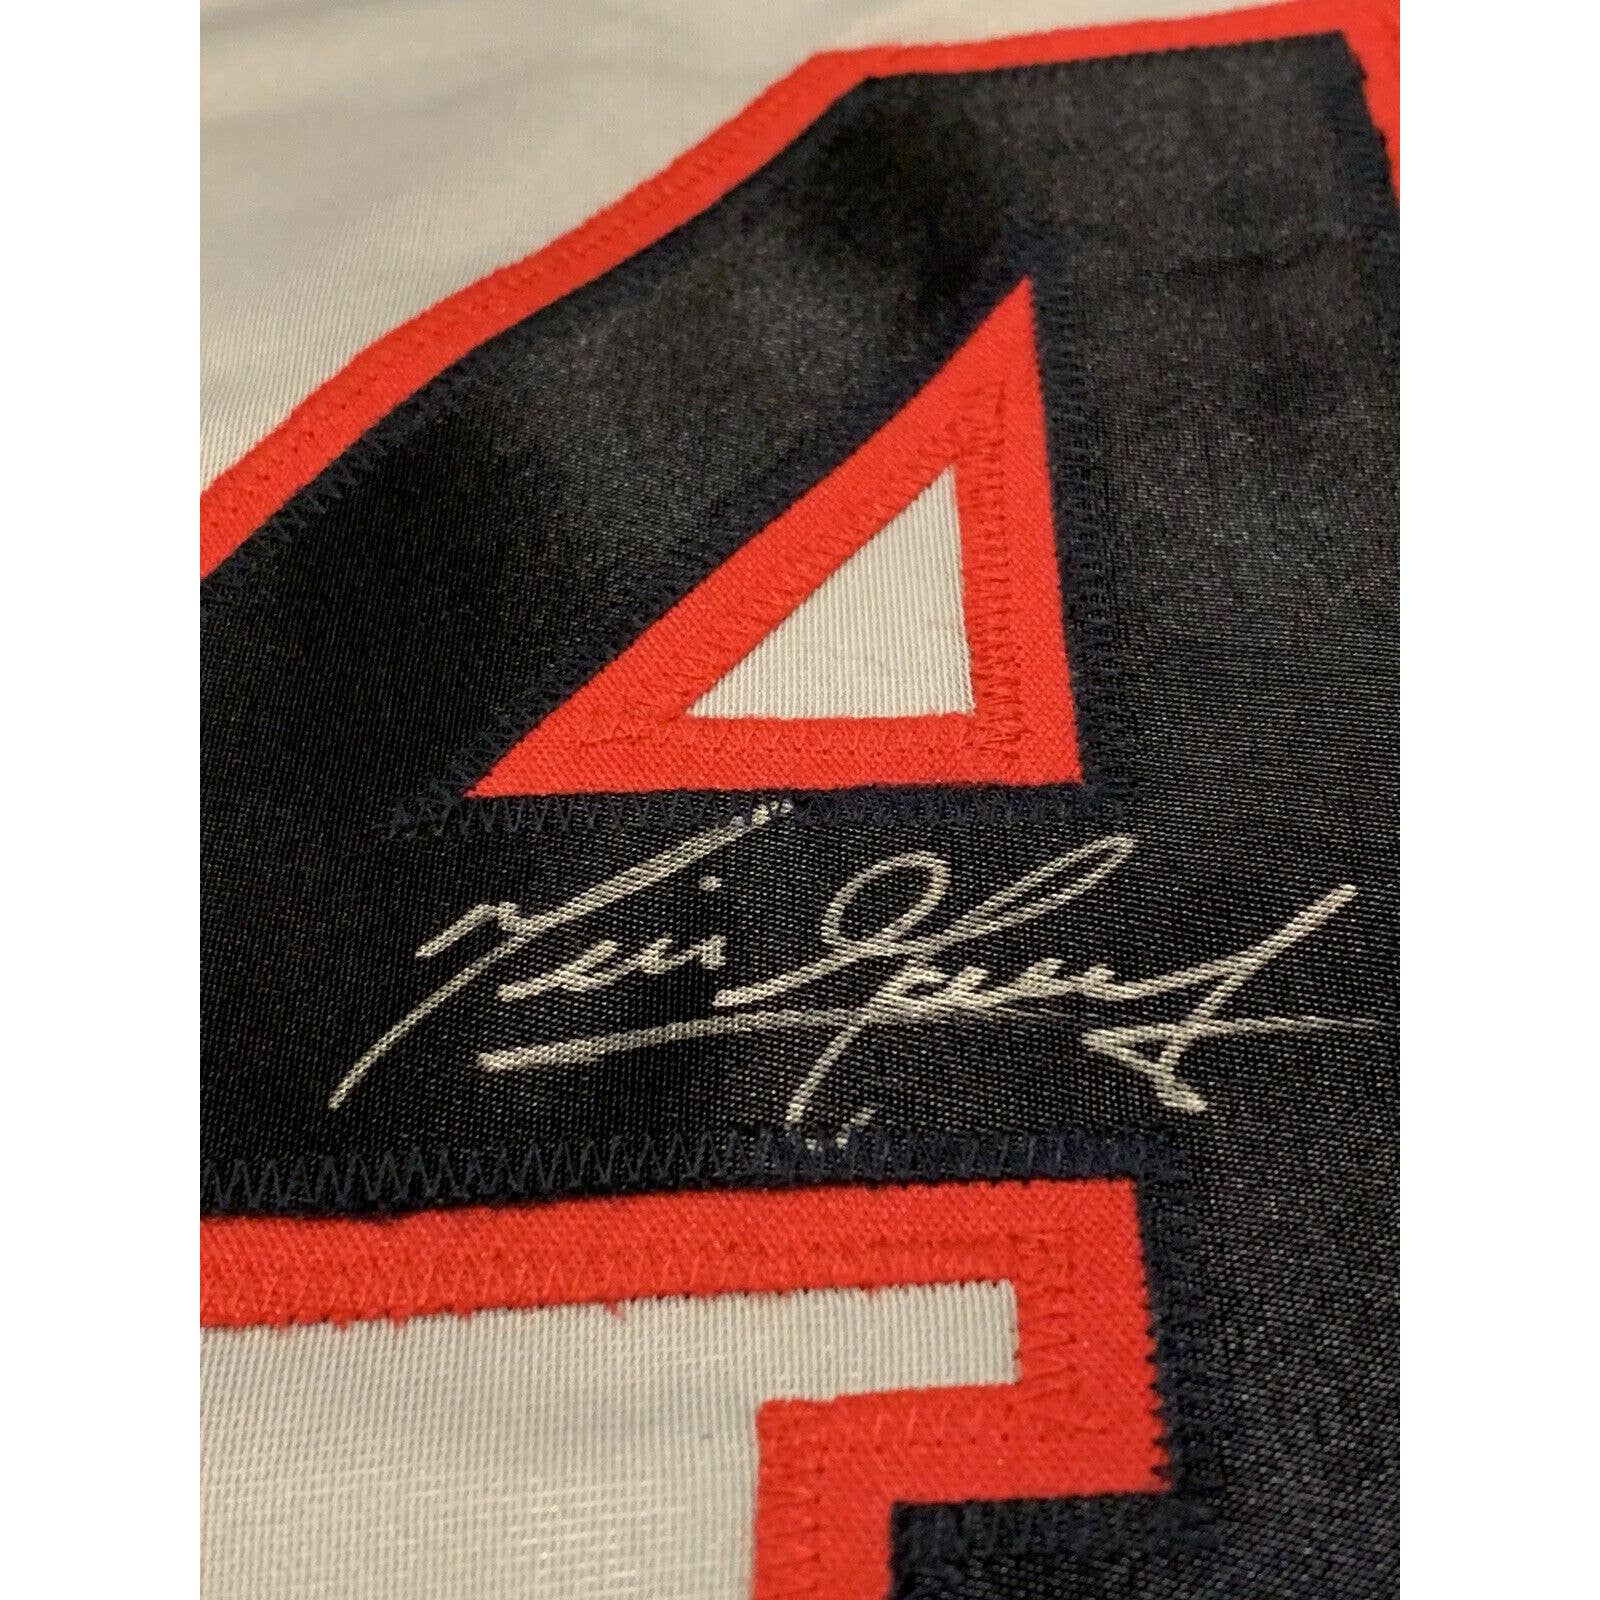 Nick Goody Autographed/Signed Jersey Cleveland Indians - TreasuresEvolved